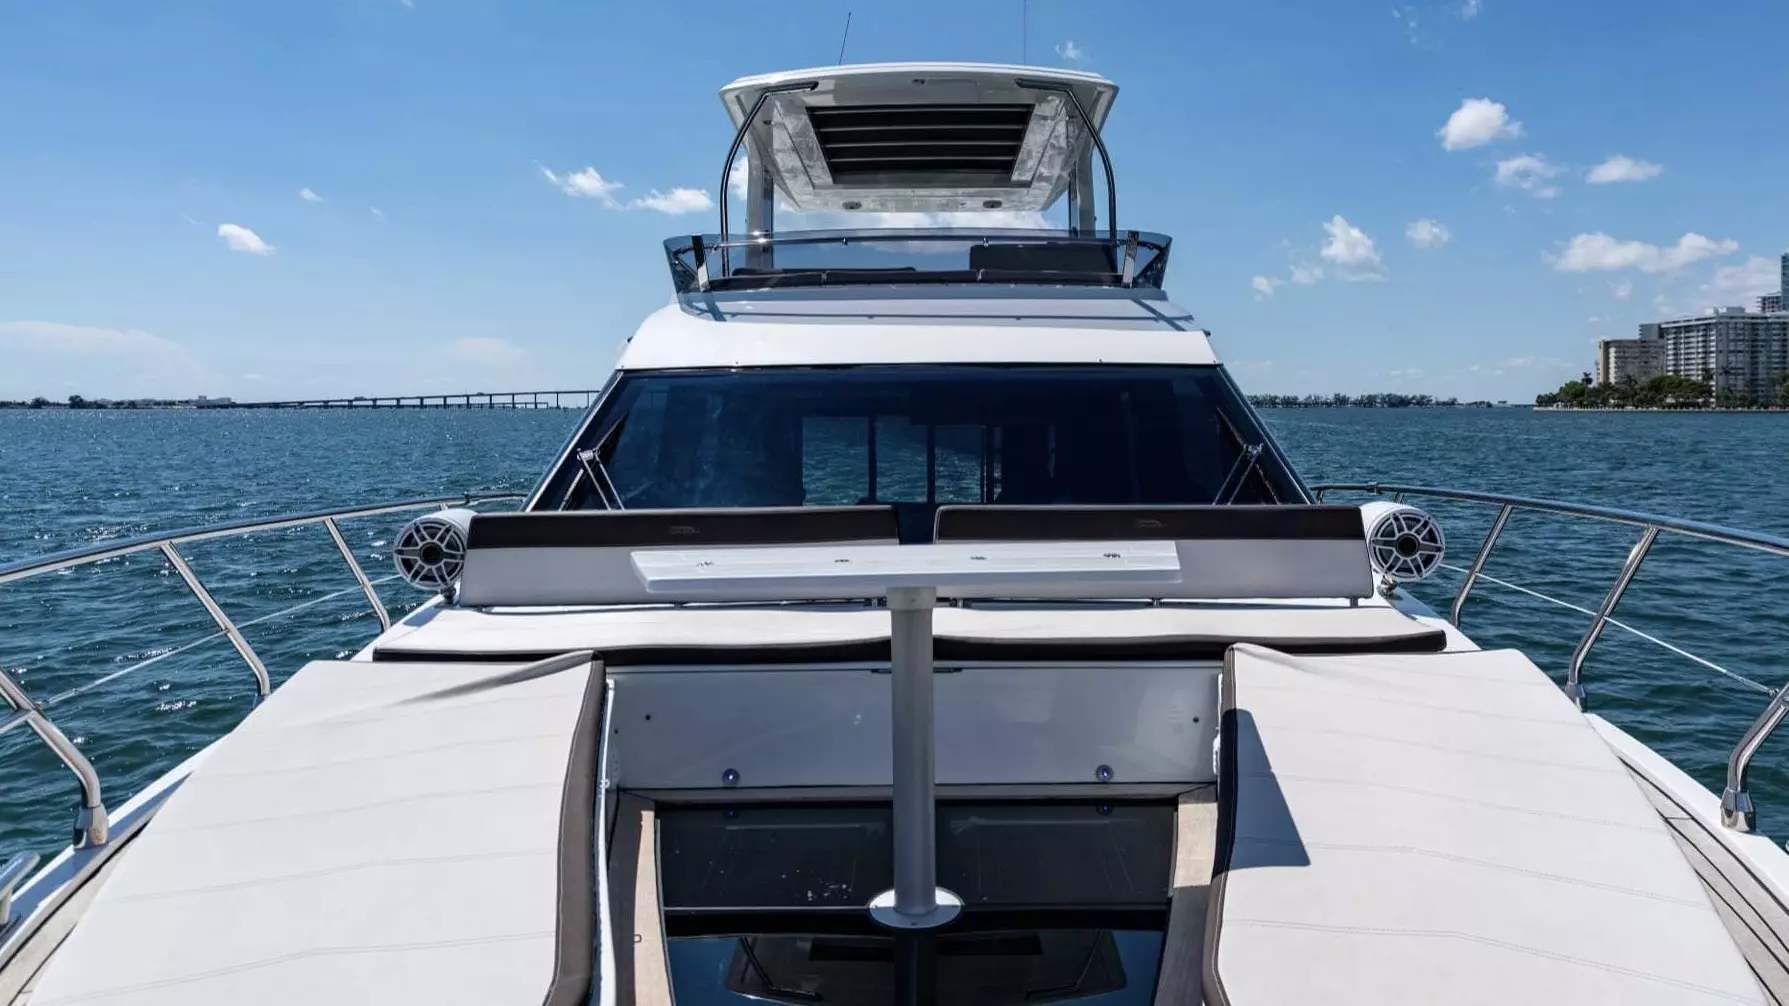 Infinity FL by Galeon - Top rates for a Charter of a private Motor Yacht in Florida USA